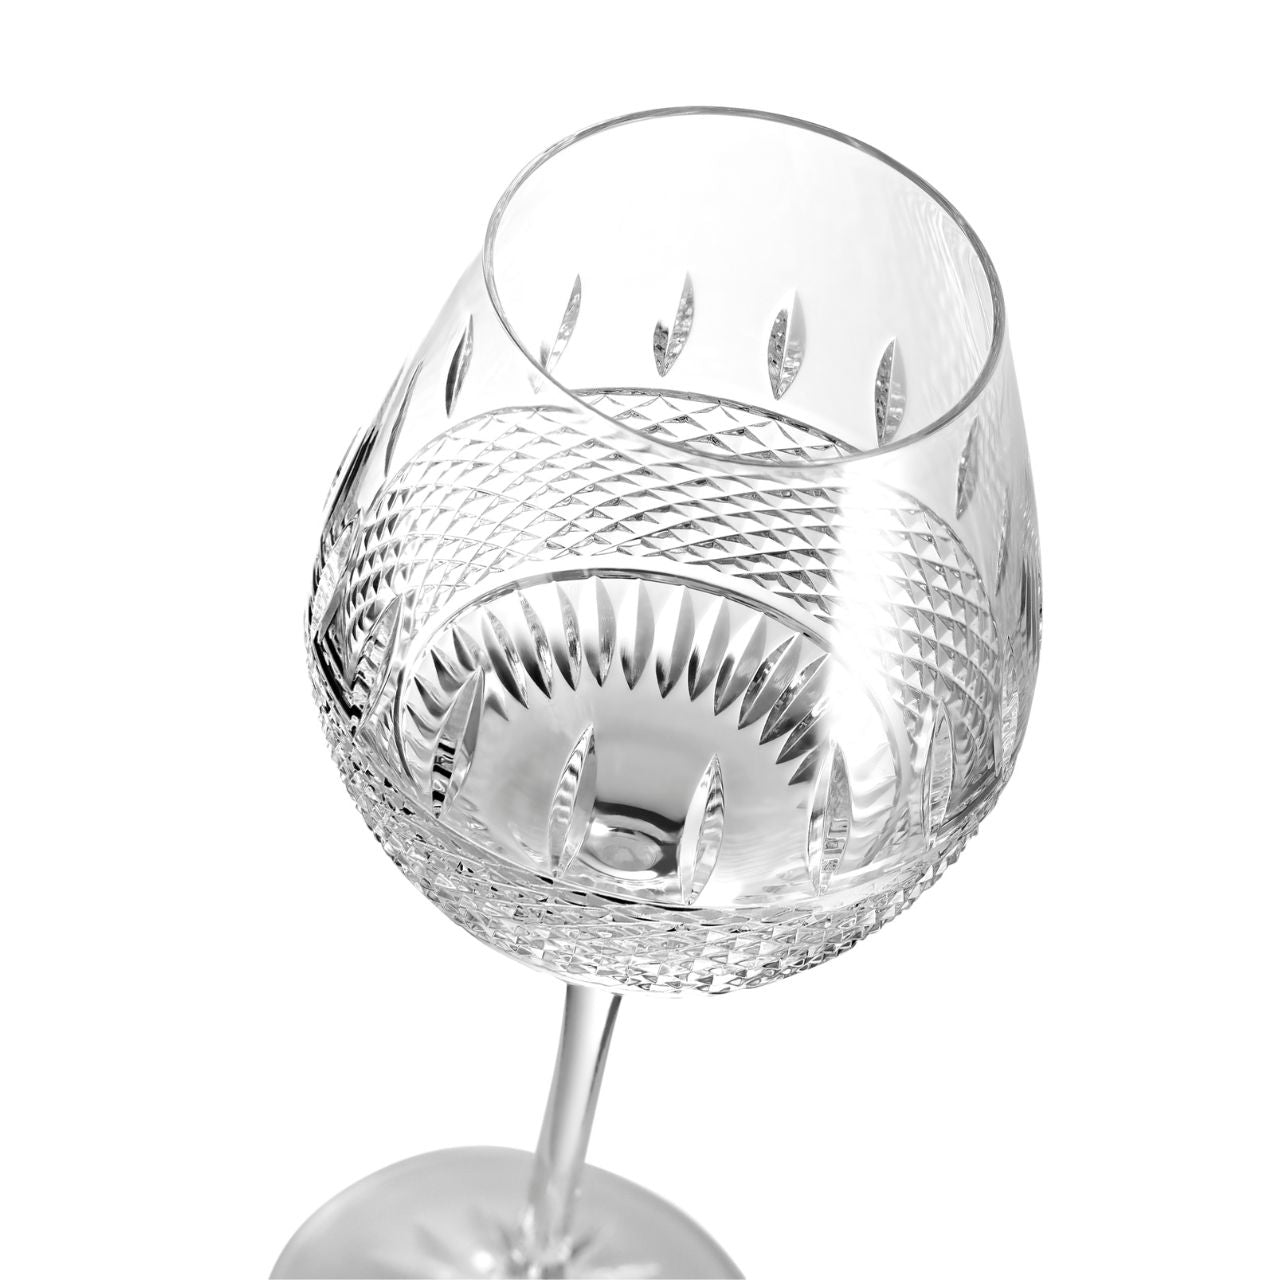 Irish Lace Red Wine Set of 2 by Waterford Crystal  An elegant marriage of form and function, Waterford’s Mastercraft Irish Lace Red Wine glasses are perfect for red wine connoisseurs and those who appreciate the clarity, weight and indulgence of timeless crystal.